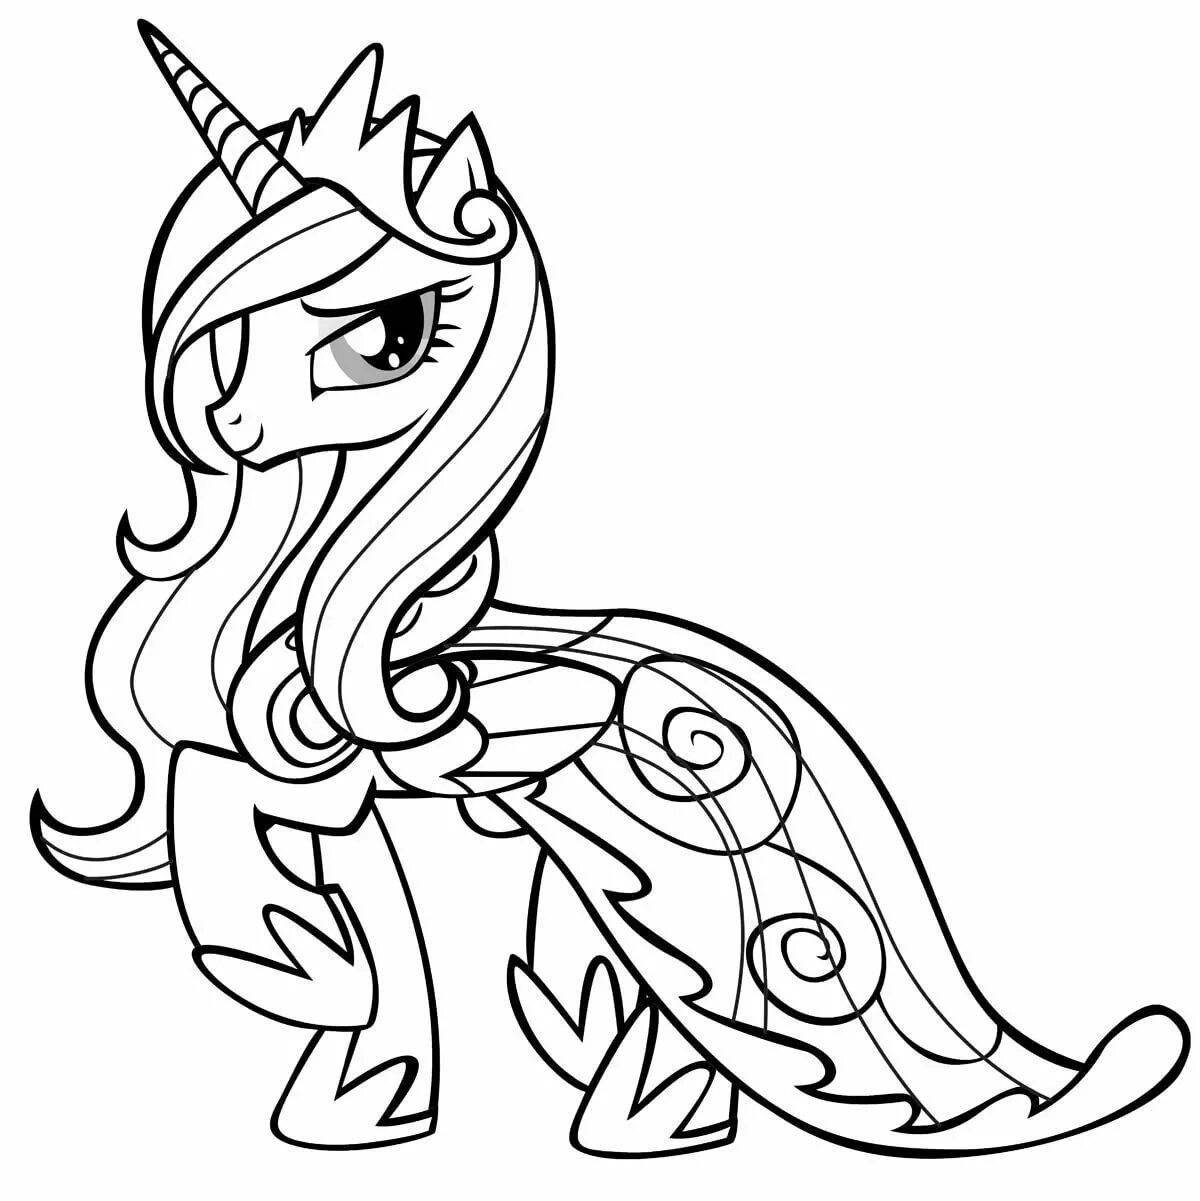 Shine pony coloring book